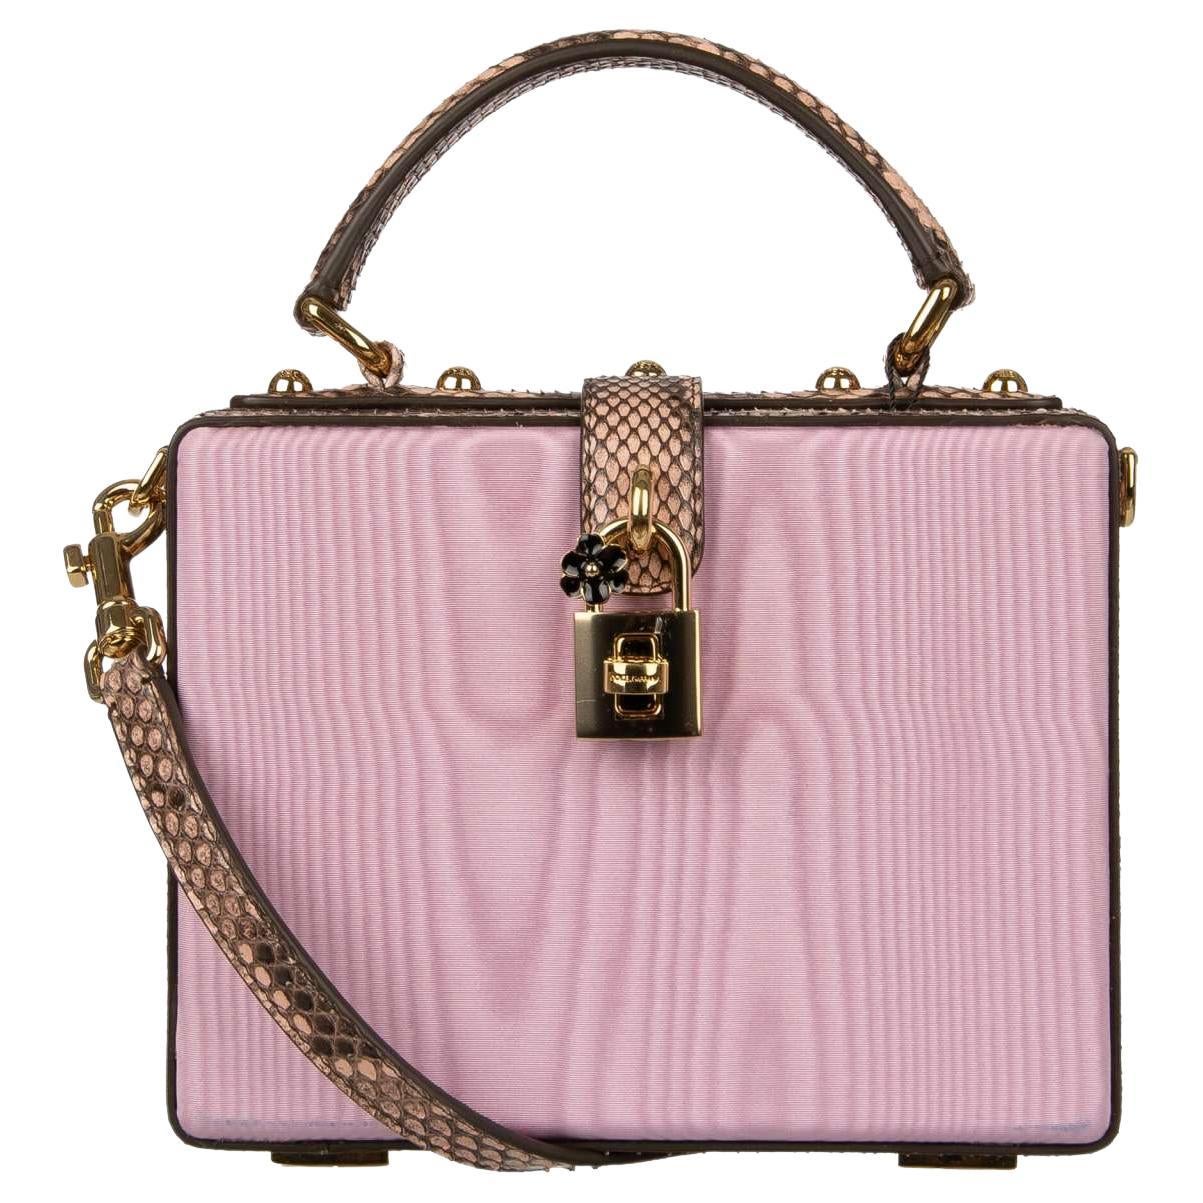 Dolce & Gabbana - Unique Snakeskin and Moire Clutch Bag DOLCE BOX Pink For Sale